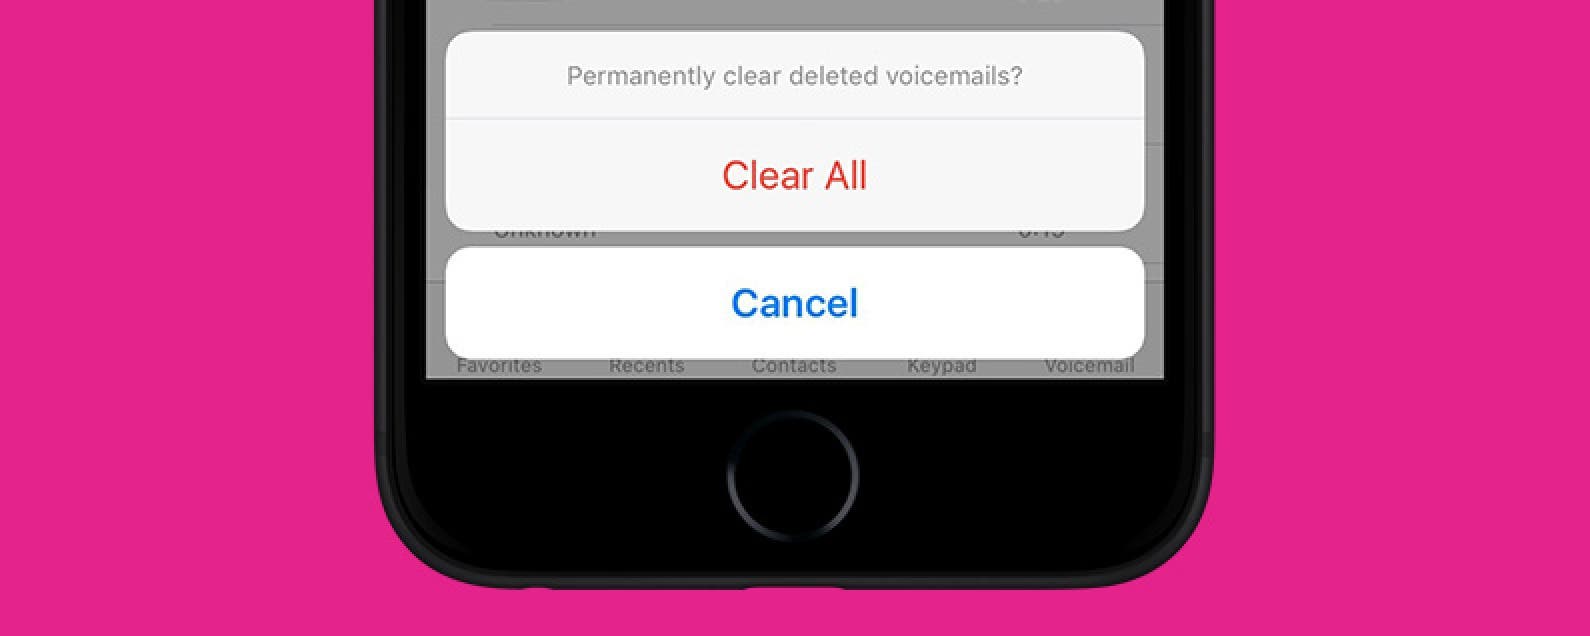 iphone deleted recently recover voicemail iphonelife tip newsletter sign